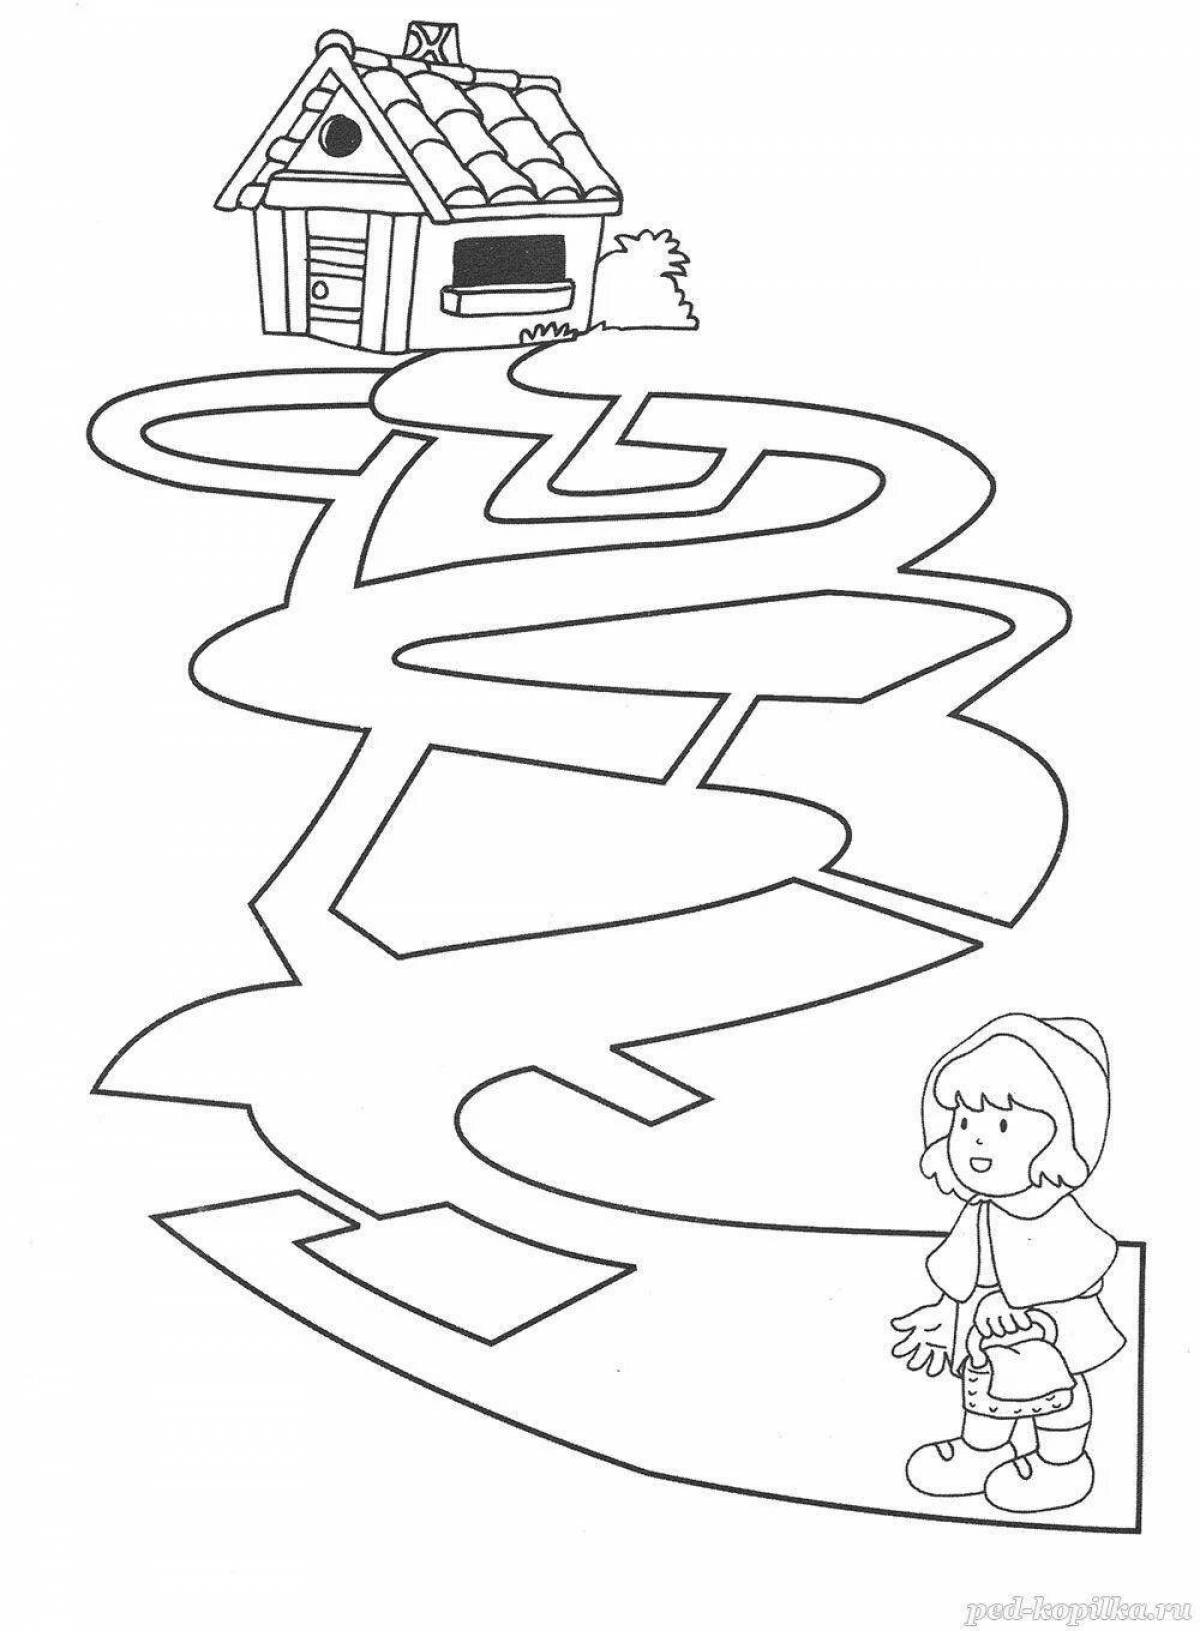 Coloring page inspiring way home